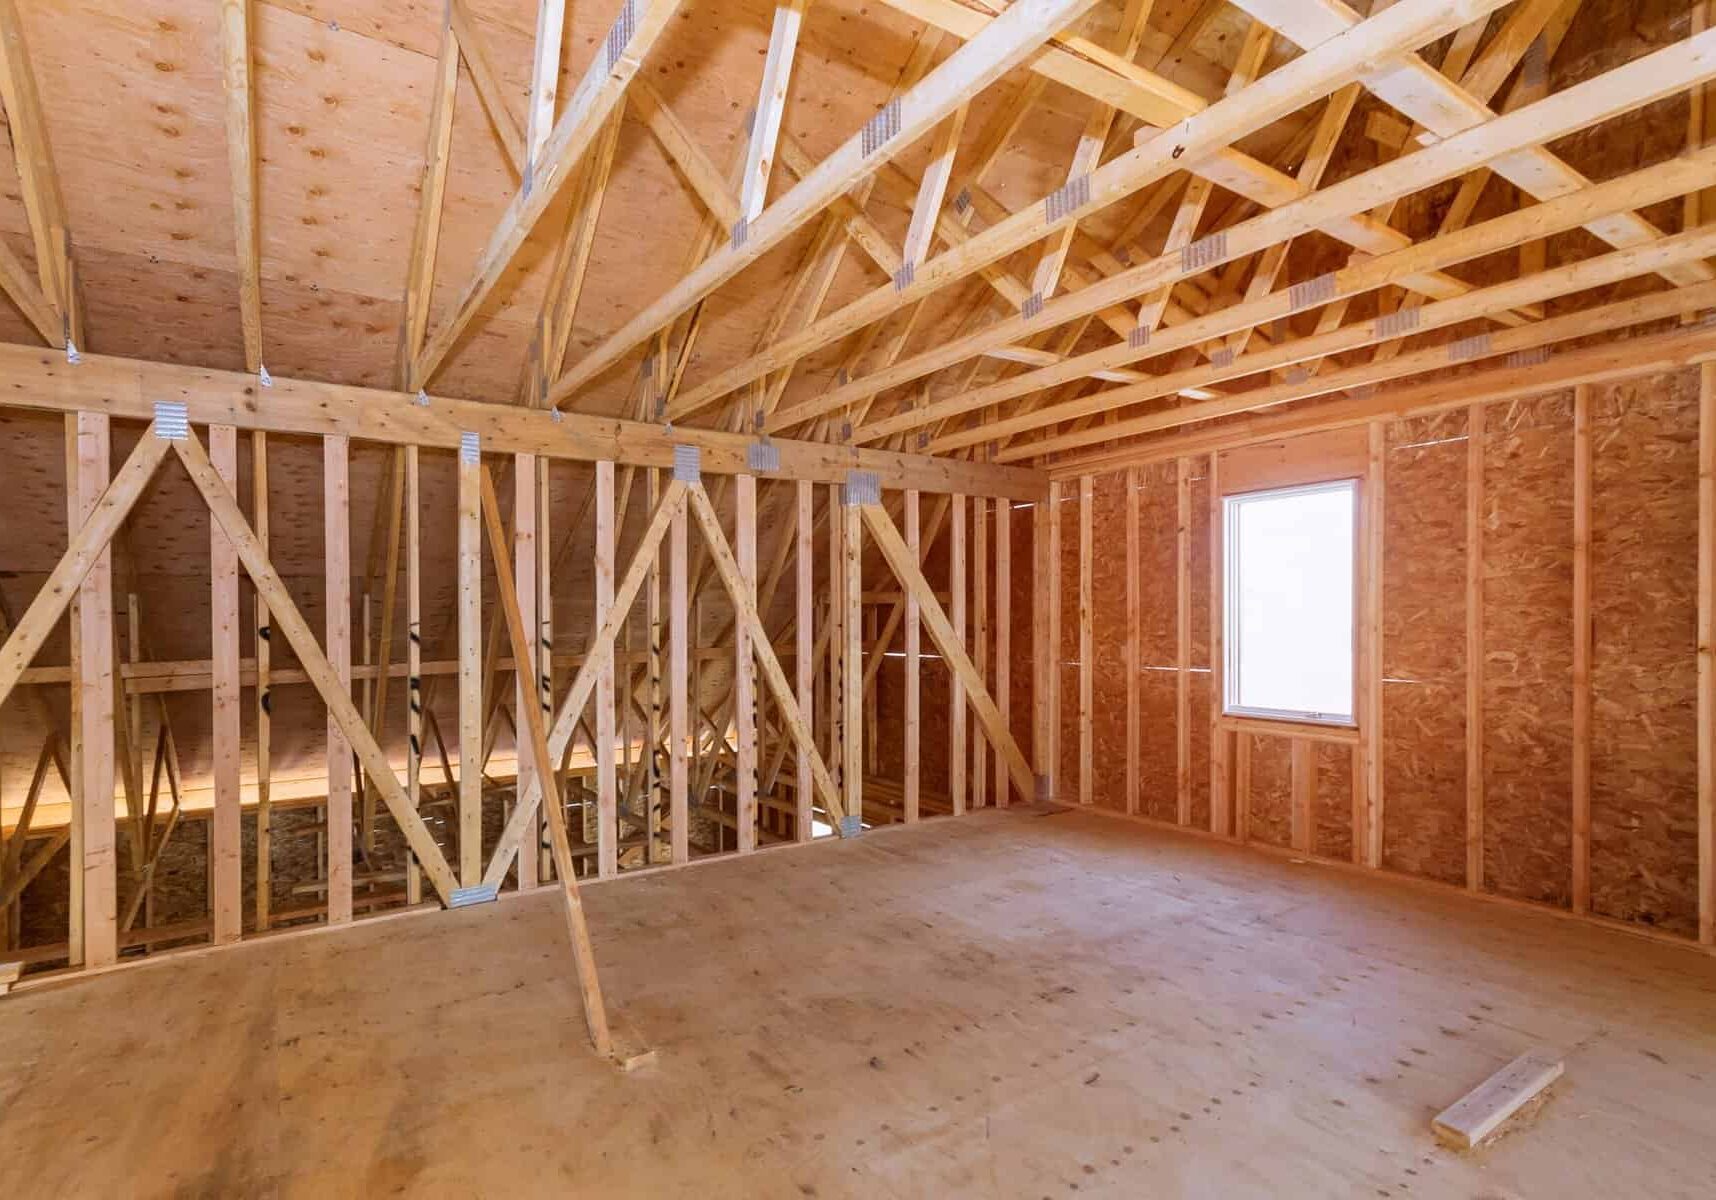 Unfinished attic of a private house residential construction house framing agains